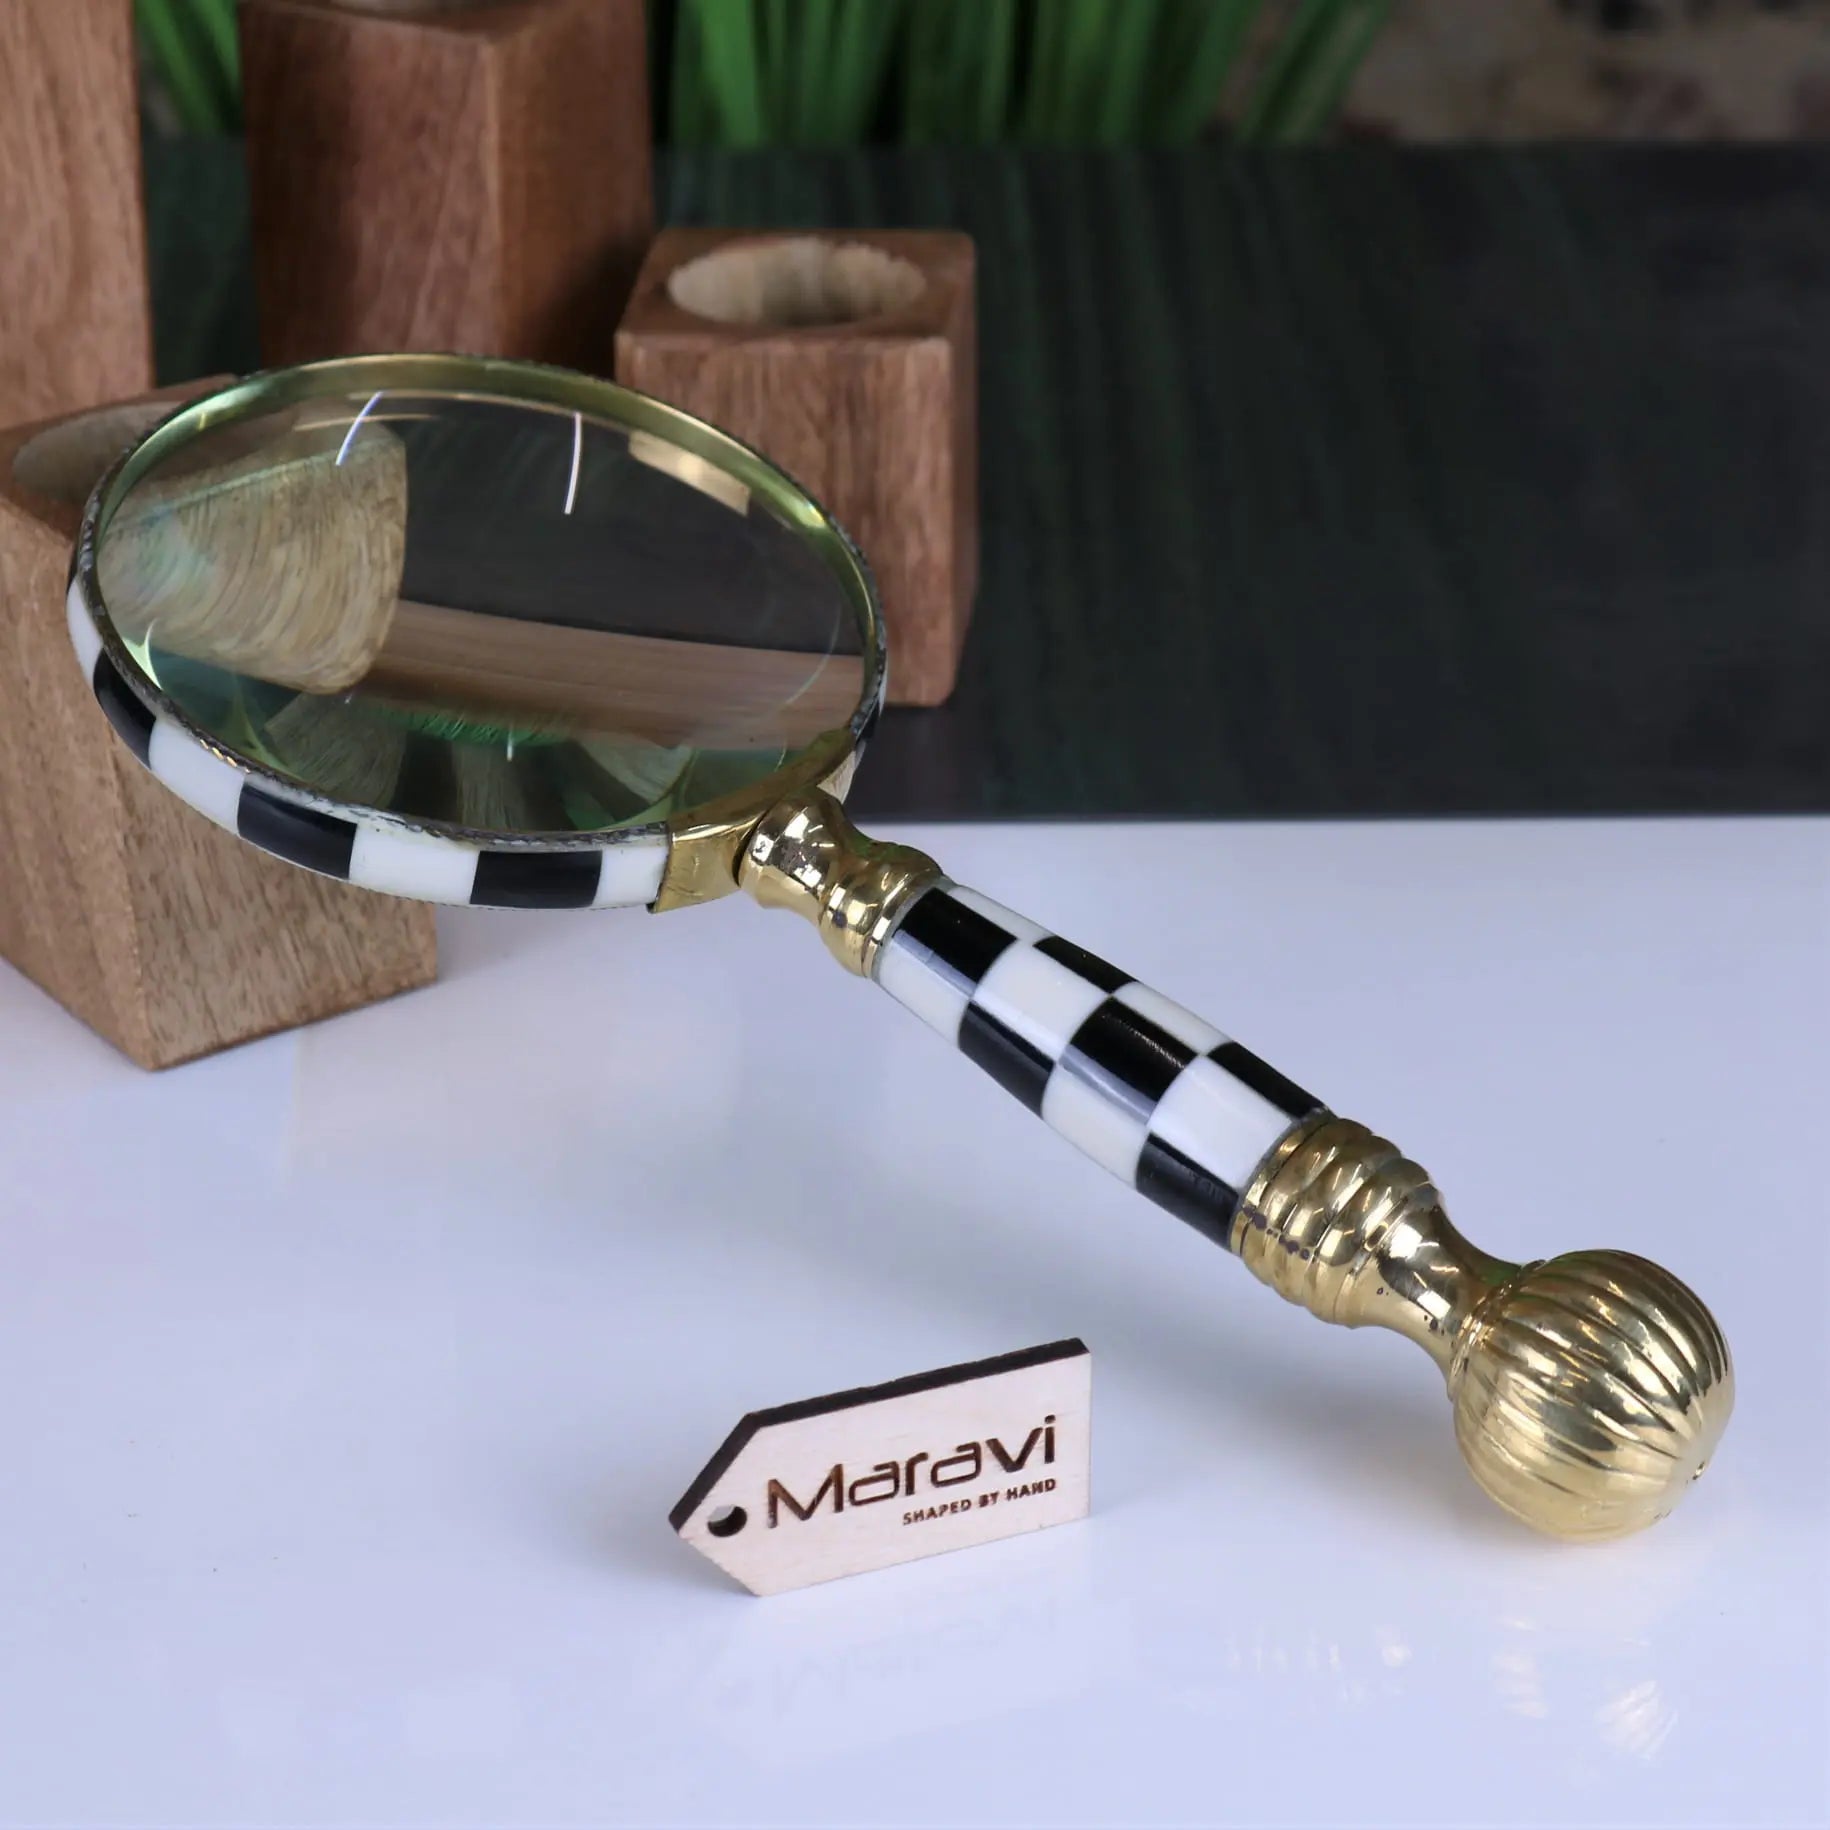 Small Magnifying Glass, with Handle, Filigree